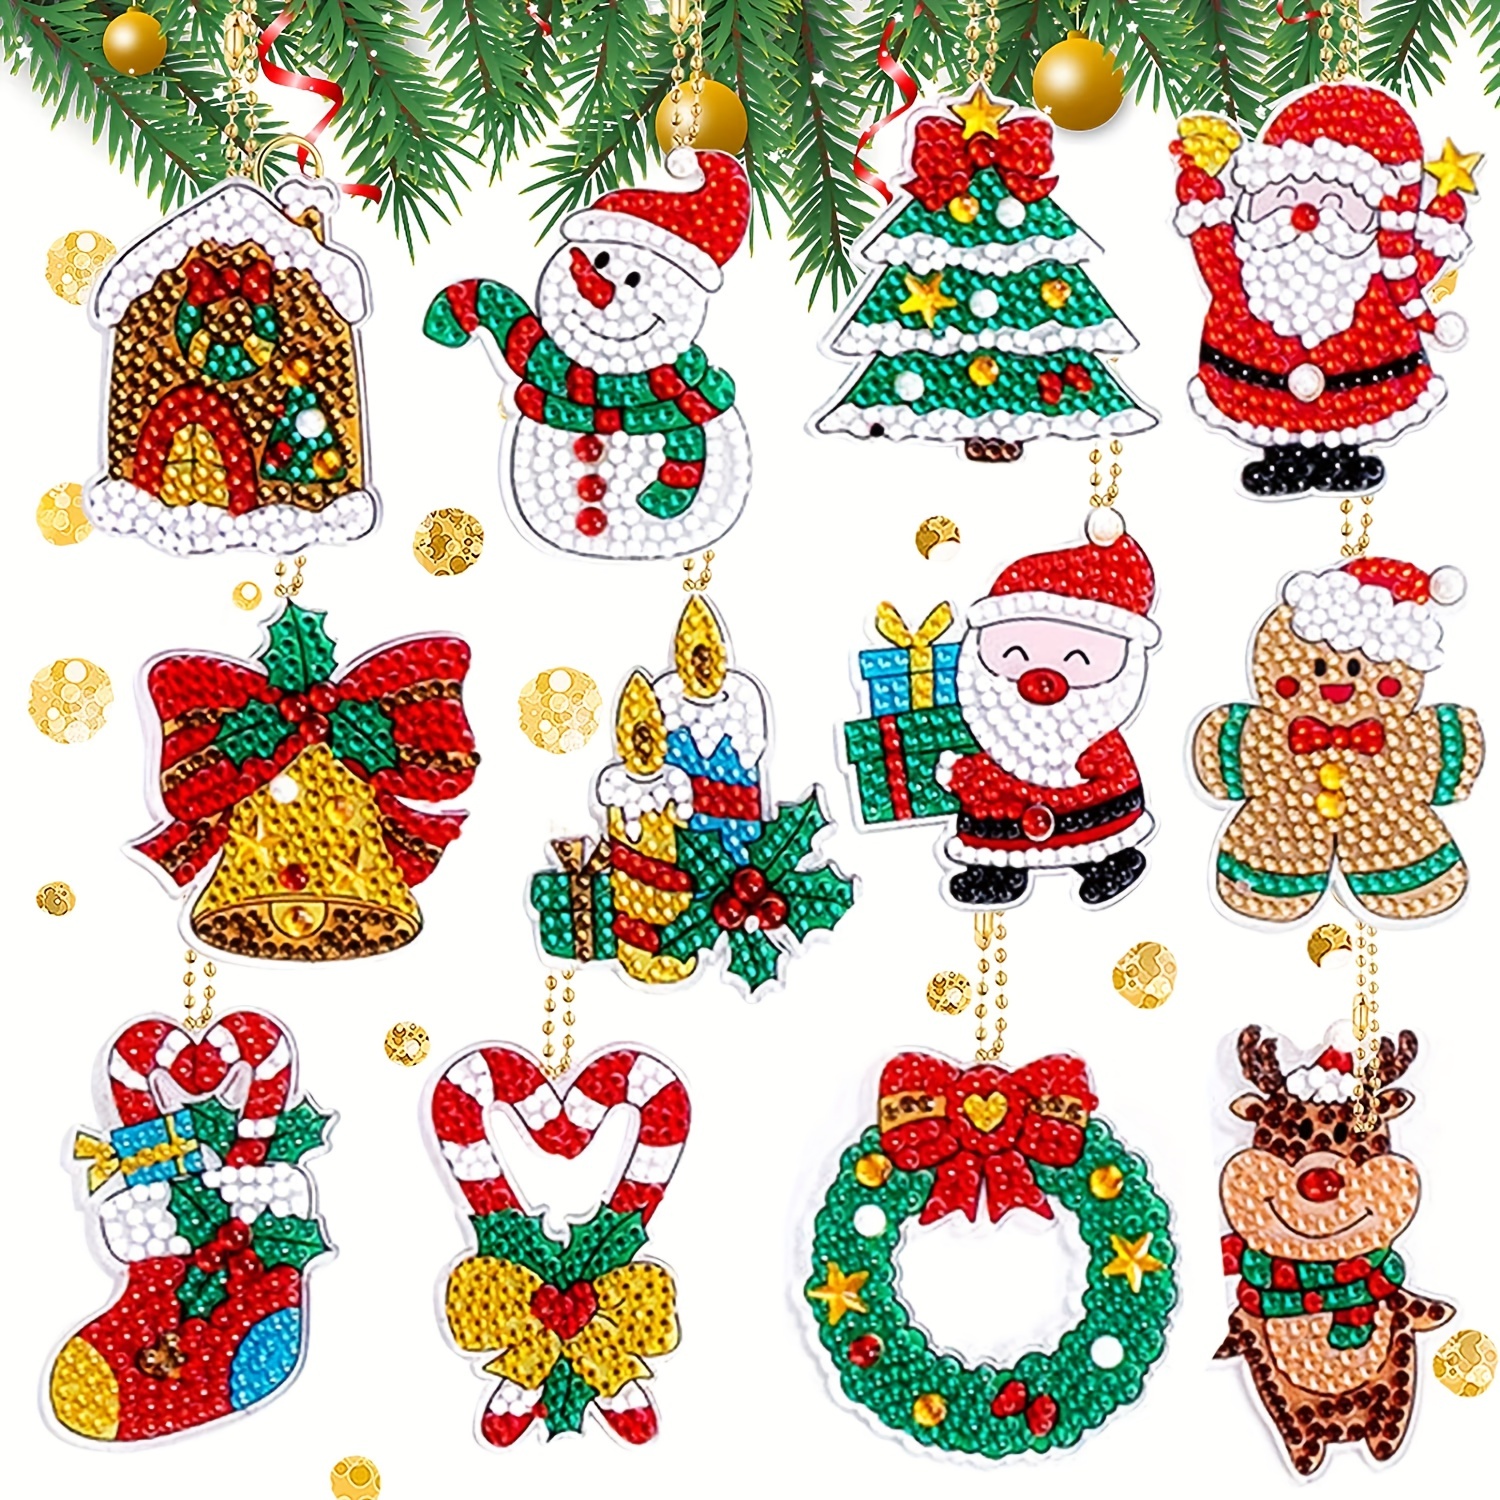  DIY Crystal Paint Arts and Crafts Set, DIY Crystal Pendant Kit, Crystal  Painting Kit for Kids, DIY Window Paint Art Ornaments Crafts Diamond  Painting Chtistmas Birthday Gifts (Chtistmas)